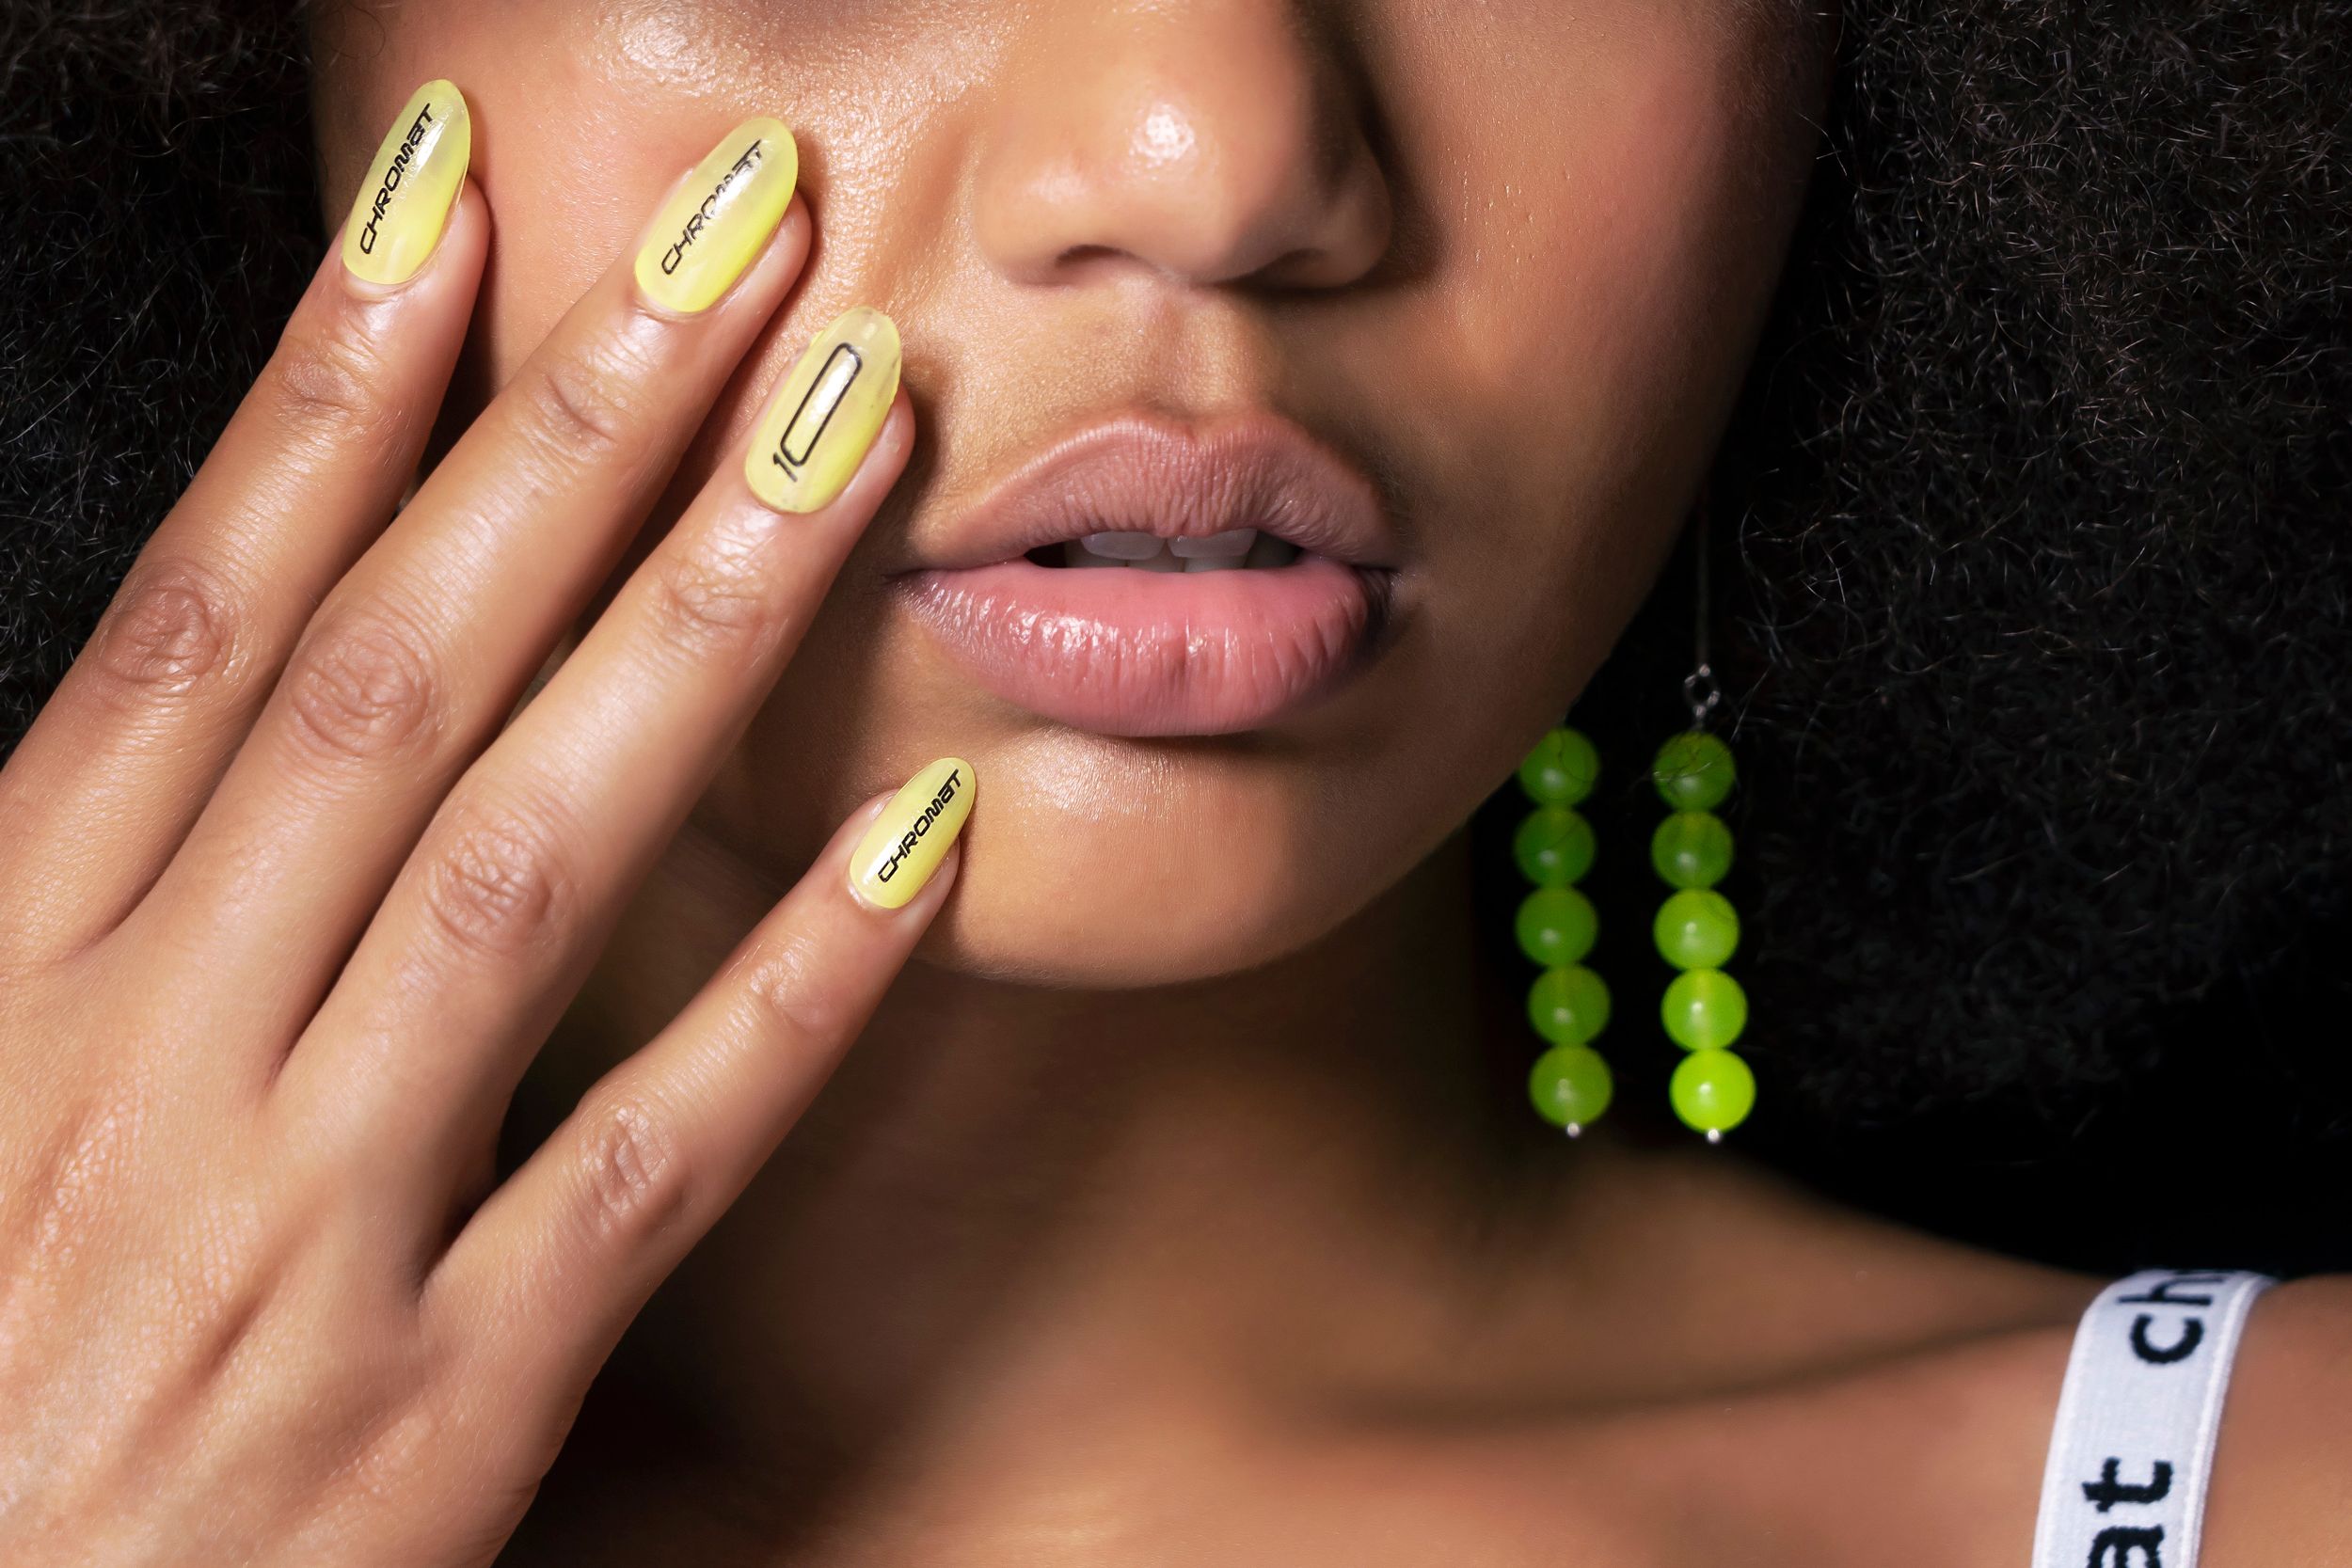 Lemon Zest Nails Are The Sweet And Sour Trend Of The Summer